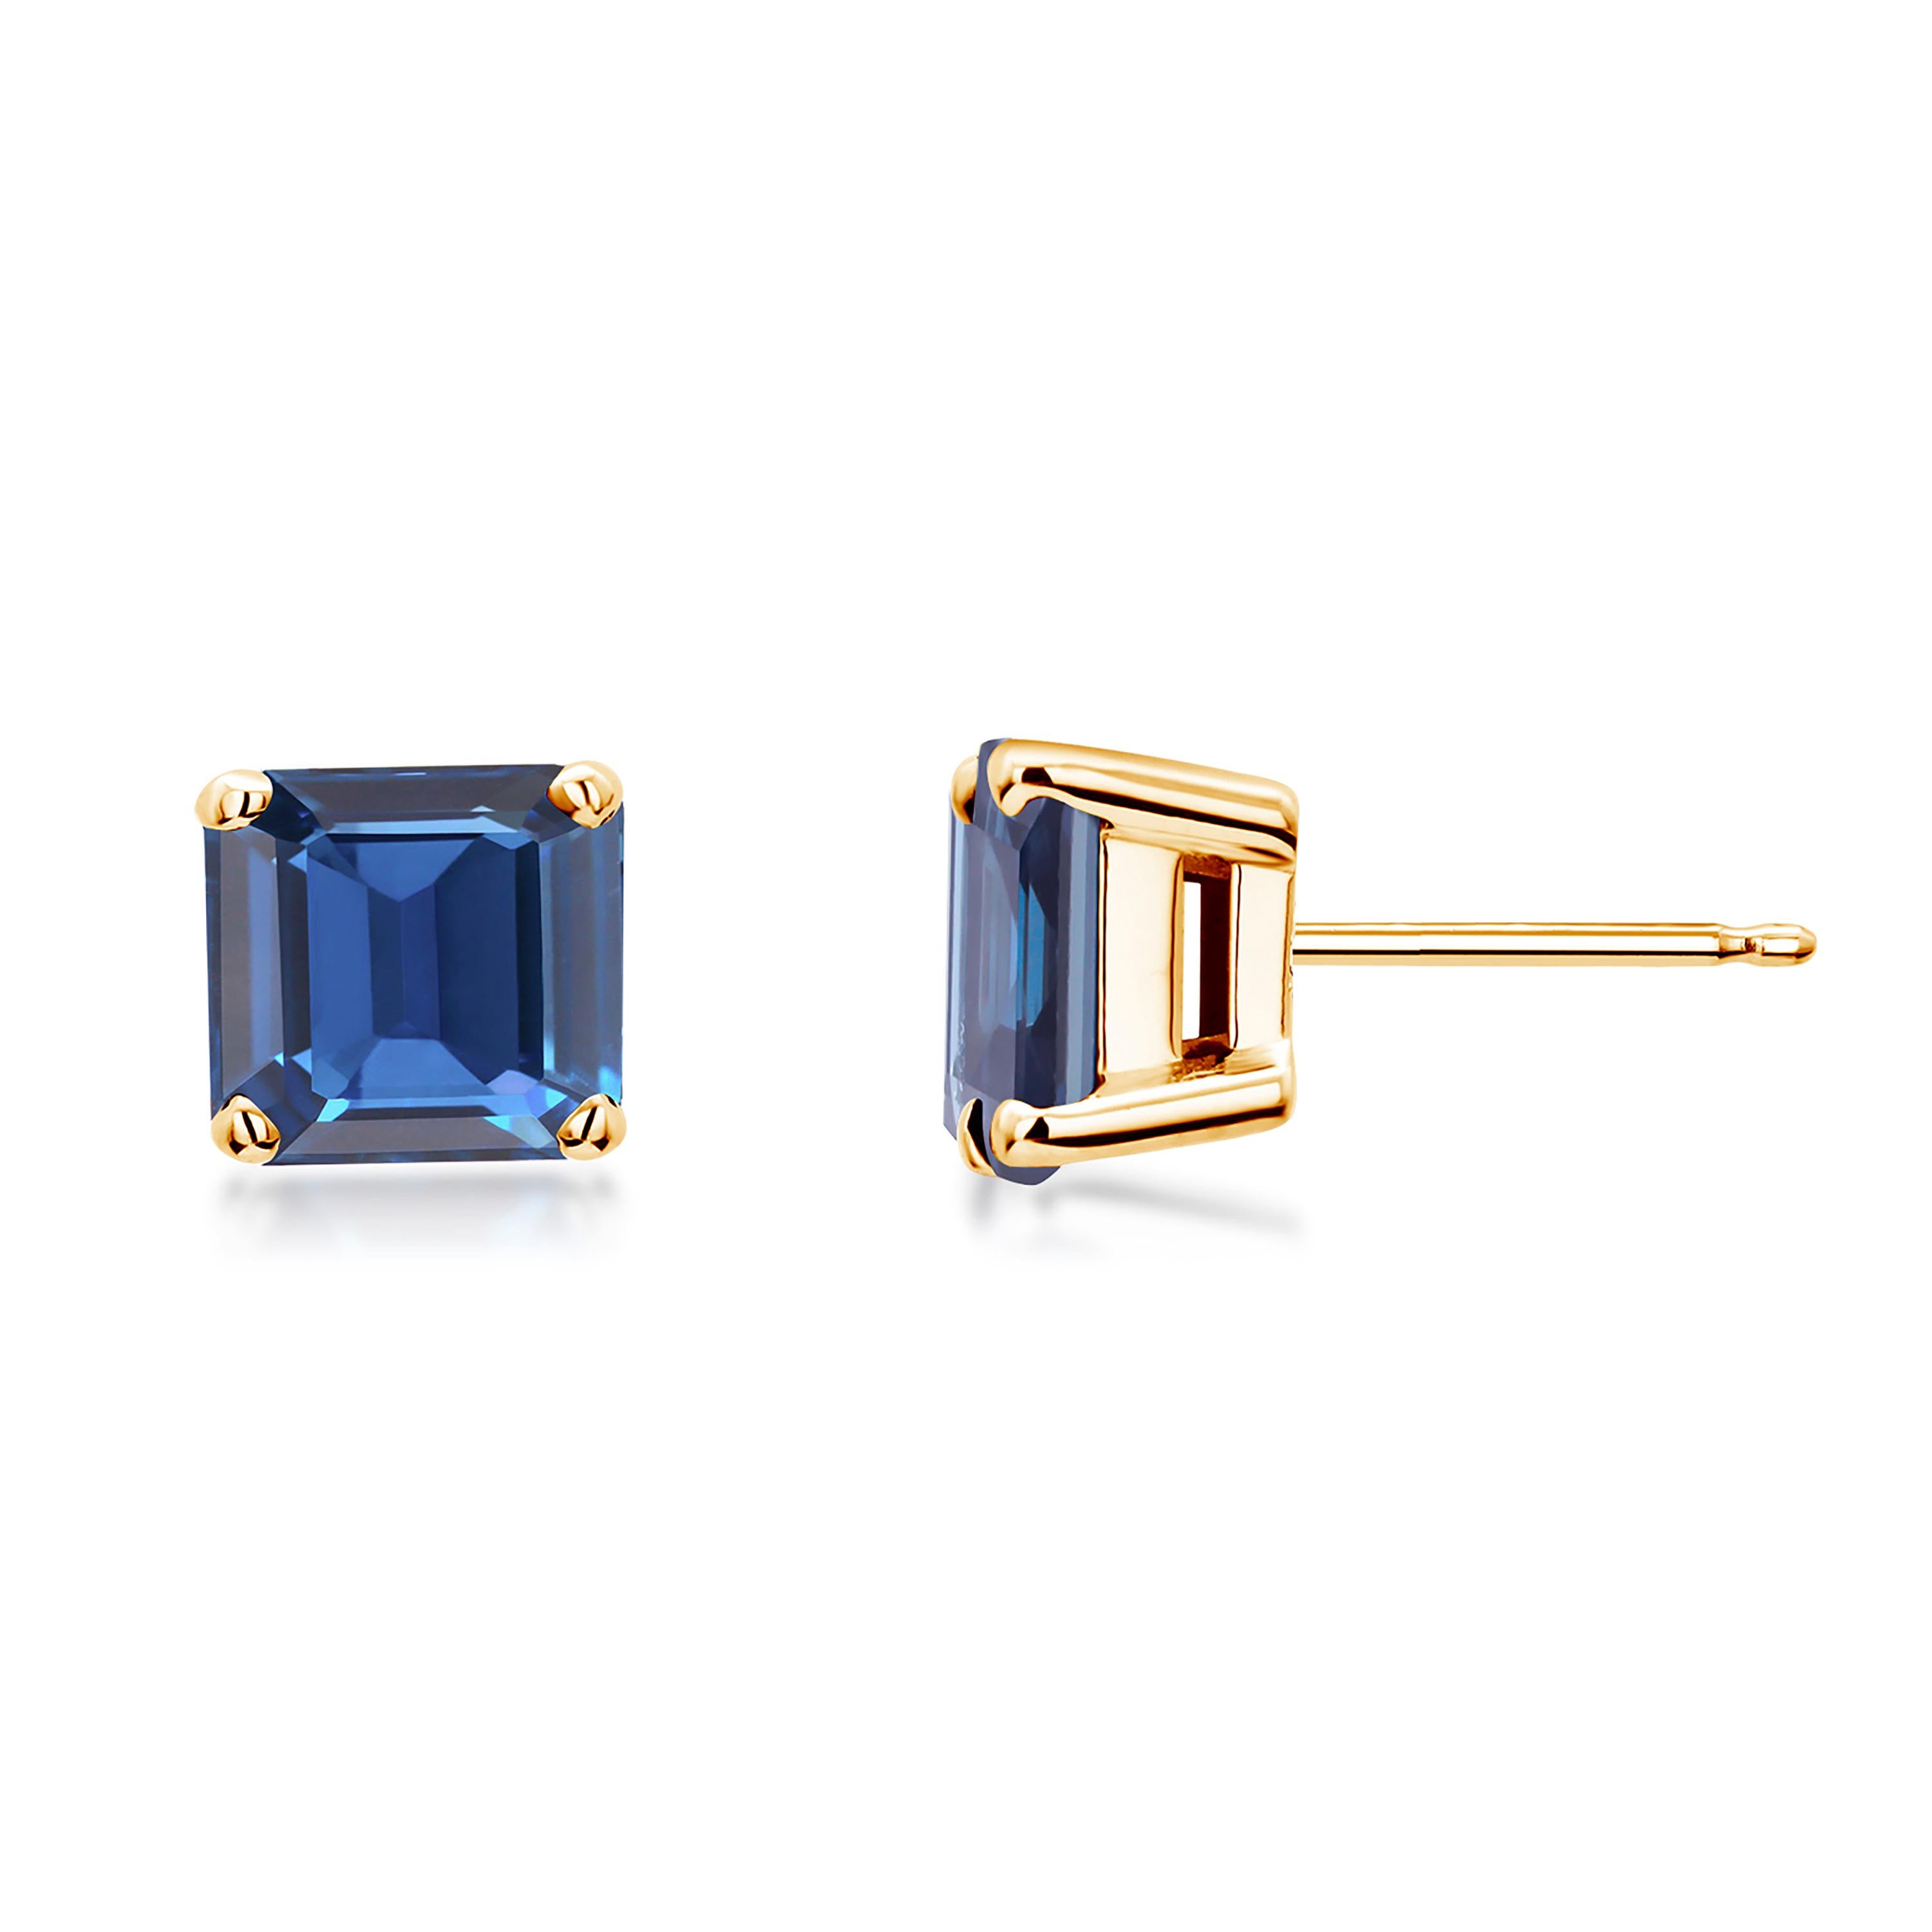 Emerald Cut Square Shaped Sapphire 1.40 Carat 14 Karat Yellow Gold 0.20 Inch Stud Earrings  For Sale